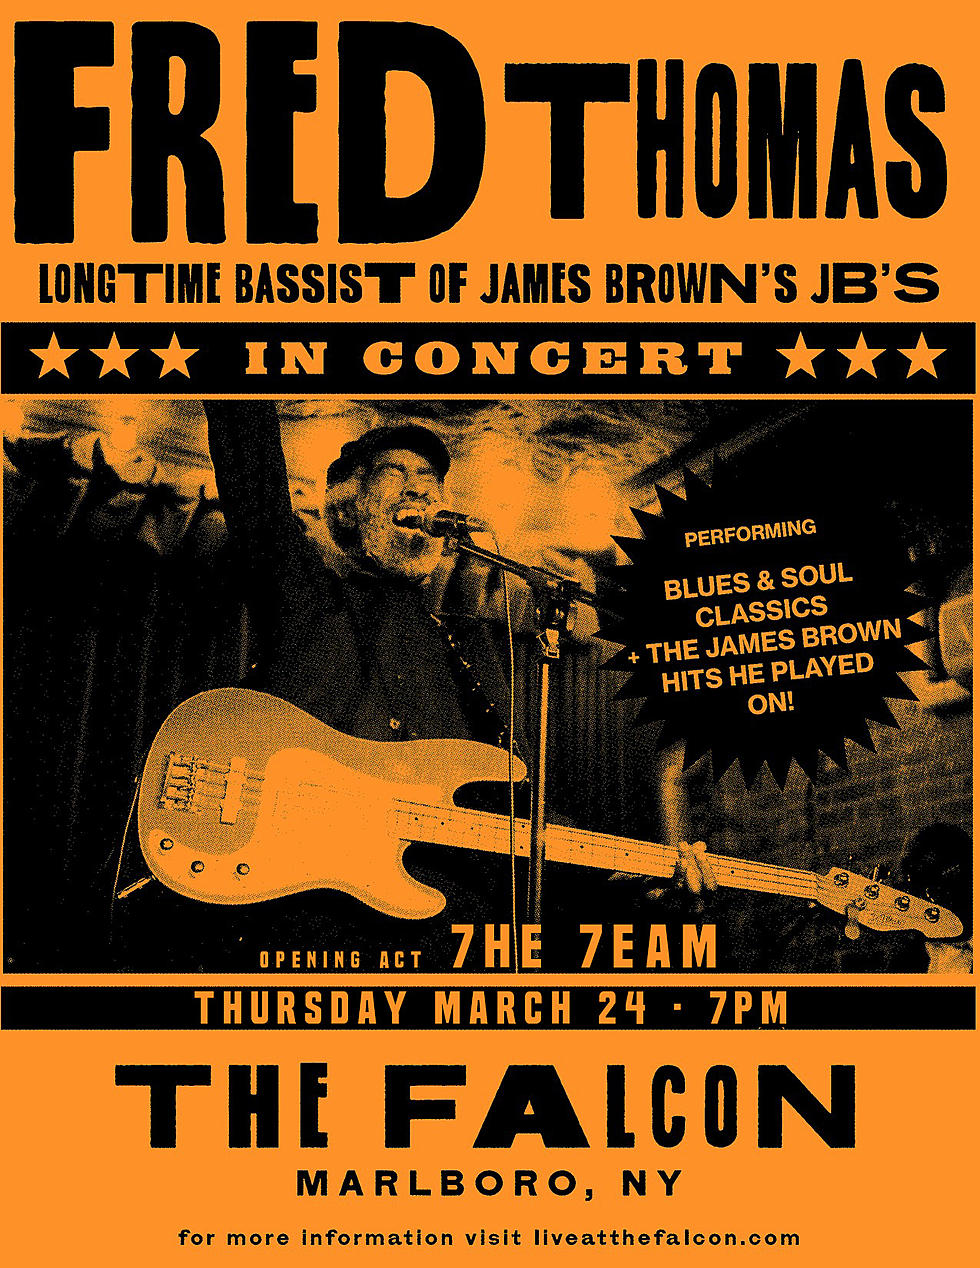 Local Band to Open for James Brown&#8217;s Iconic Bassist Fred Thomas at The Falcon